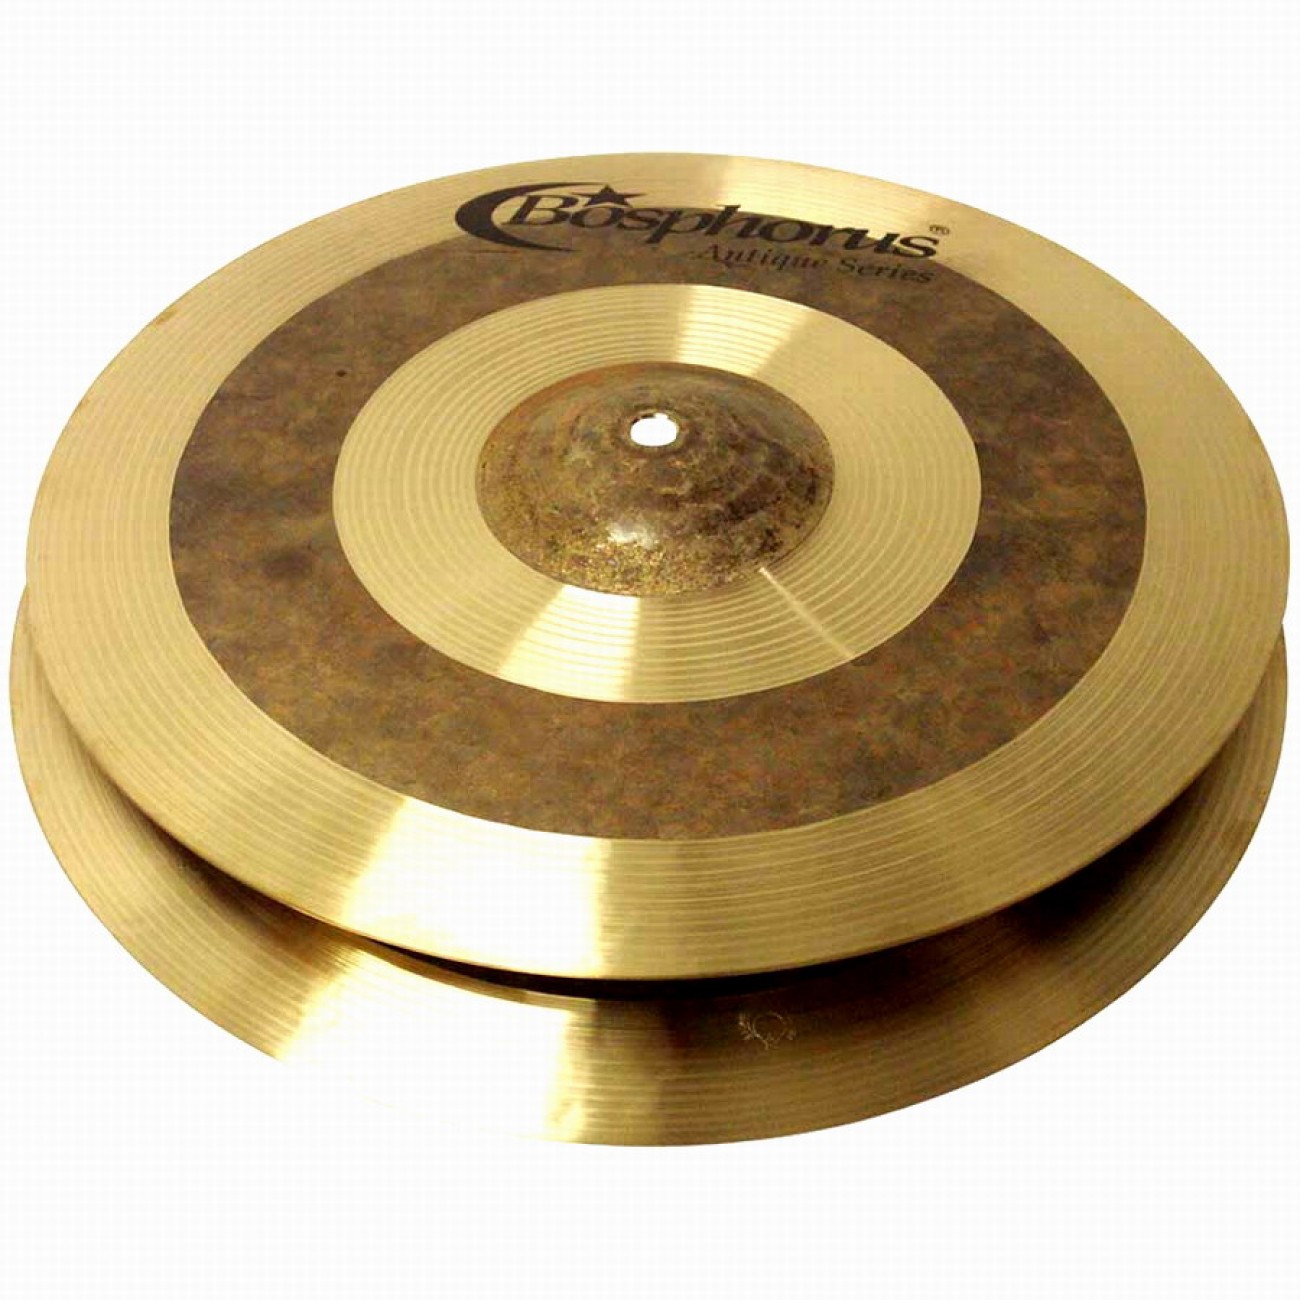 Bosphorus Cymbals A14HC 14-Inch Antique Series Hihat Cymbals Pair 